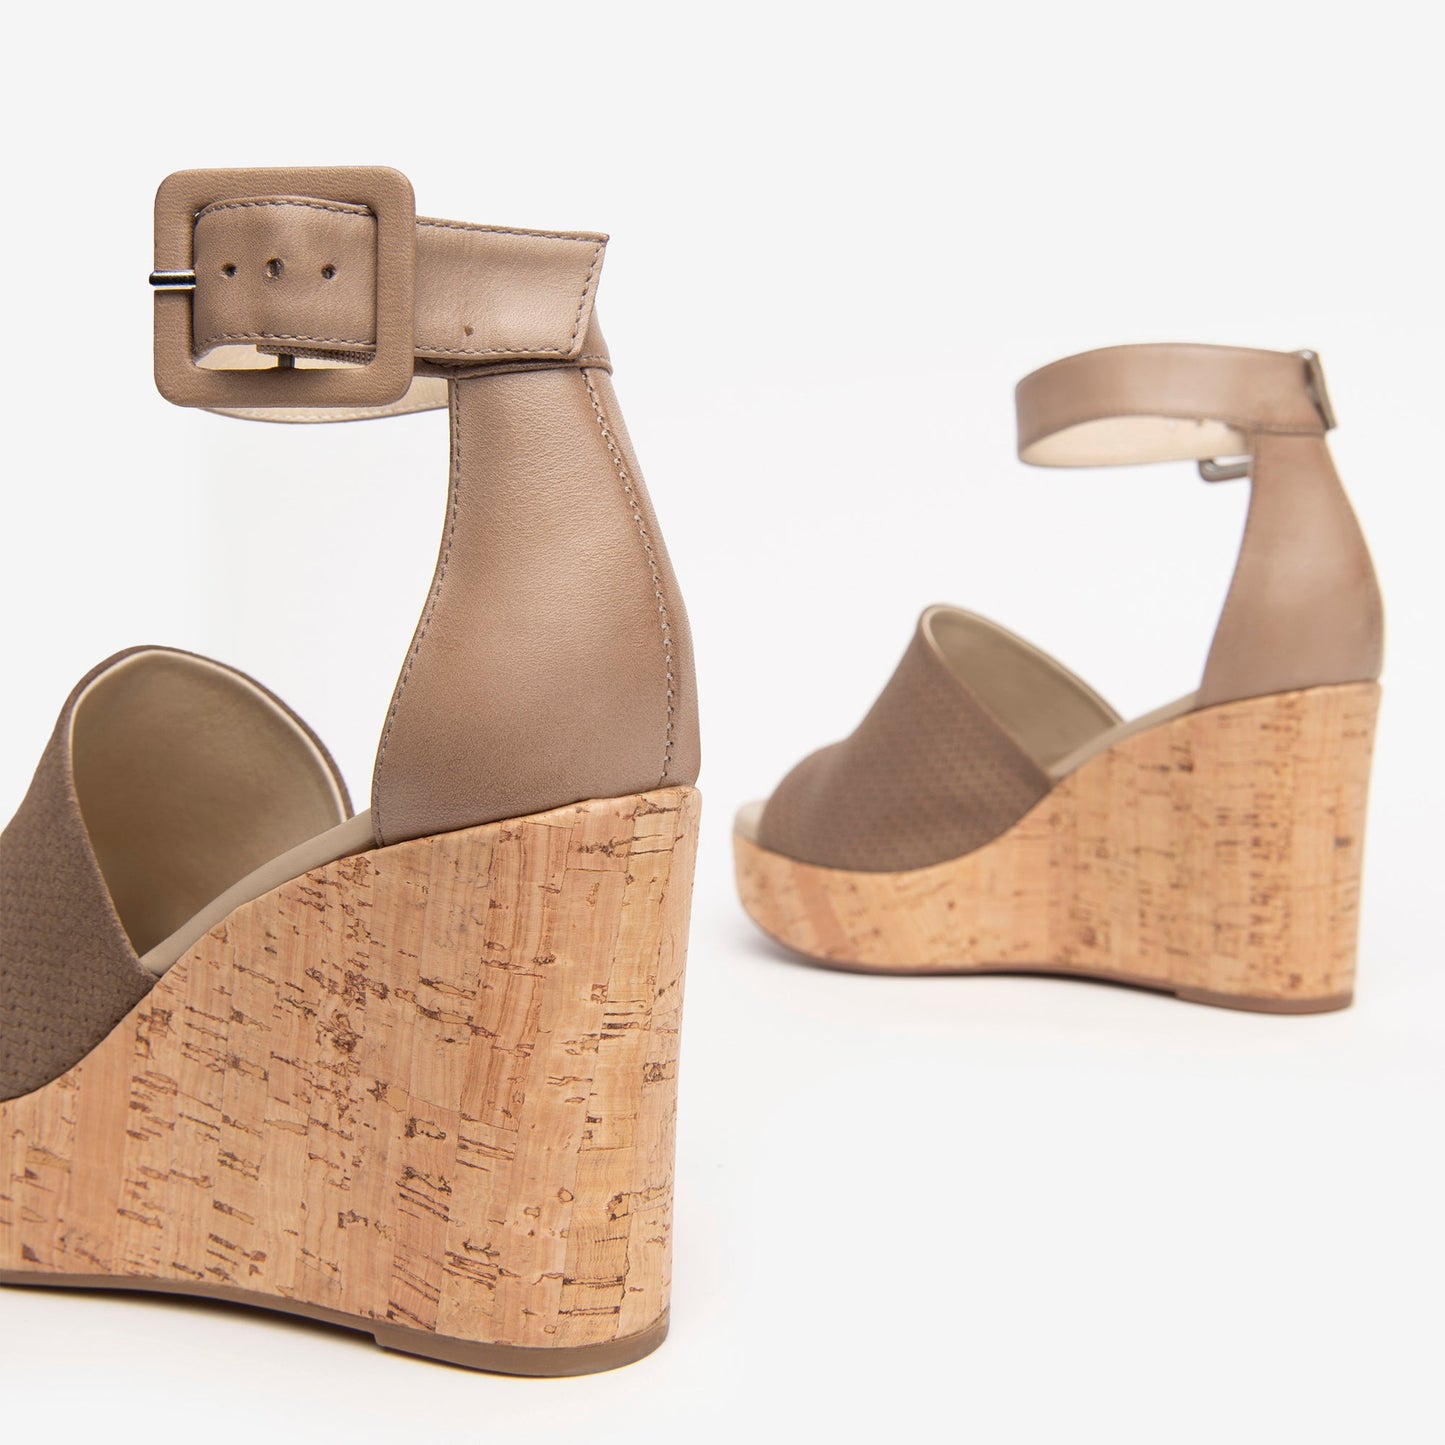 Taupe Linen Sandals